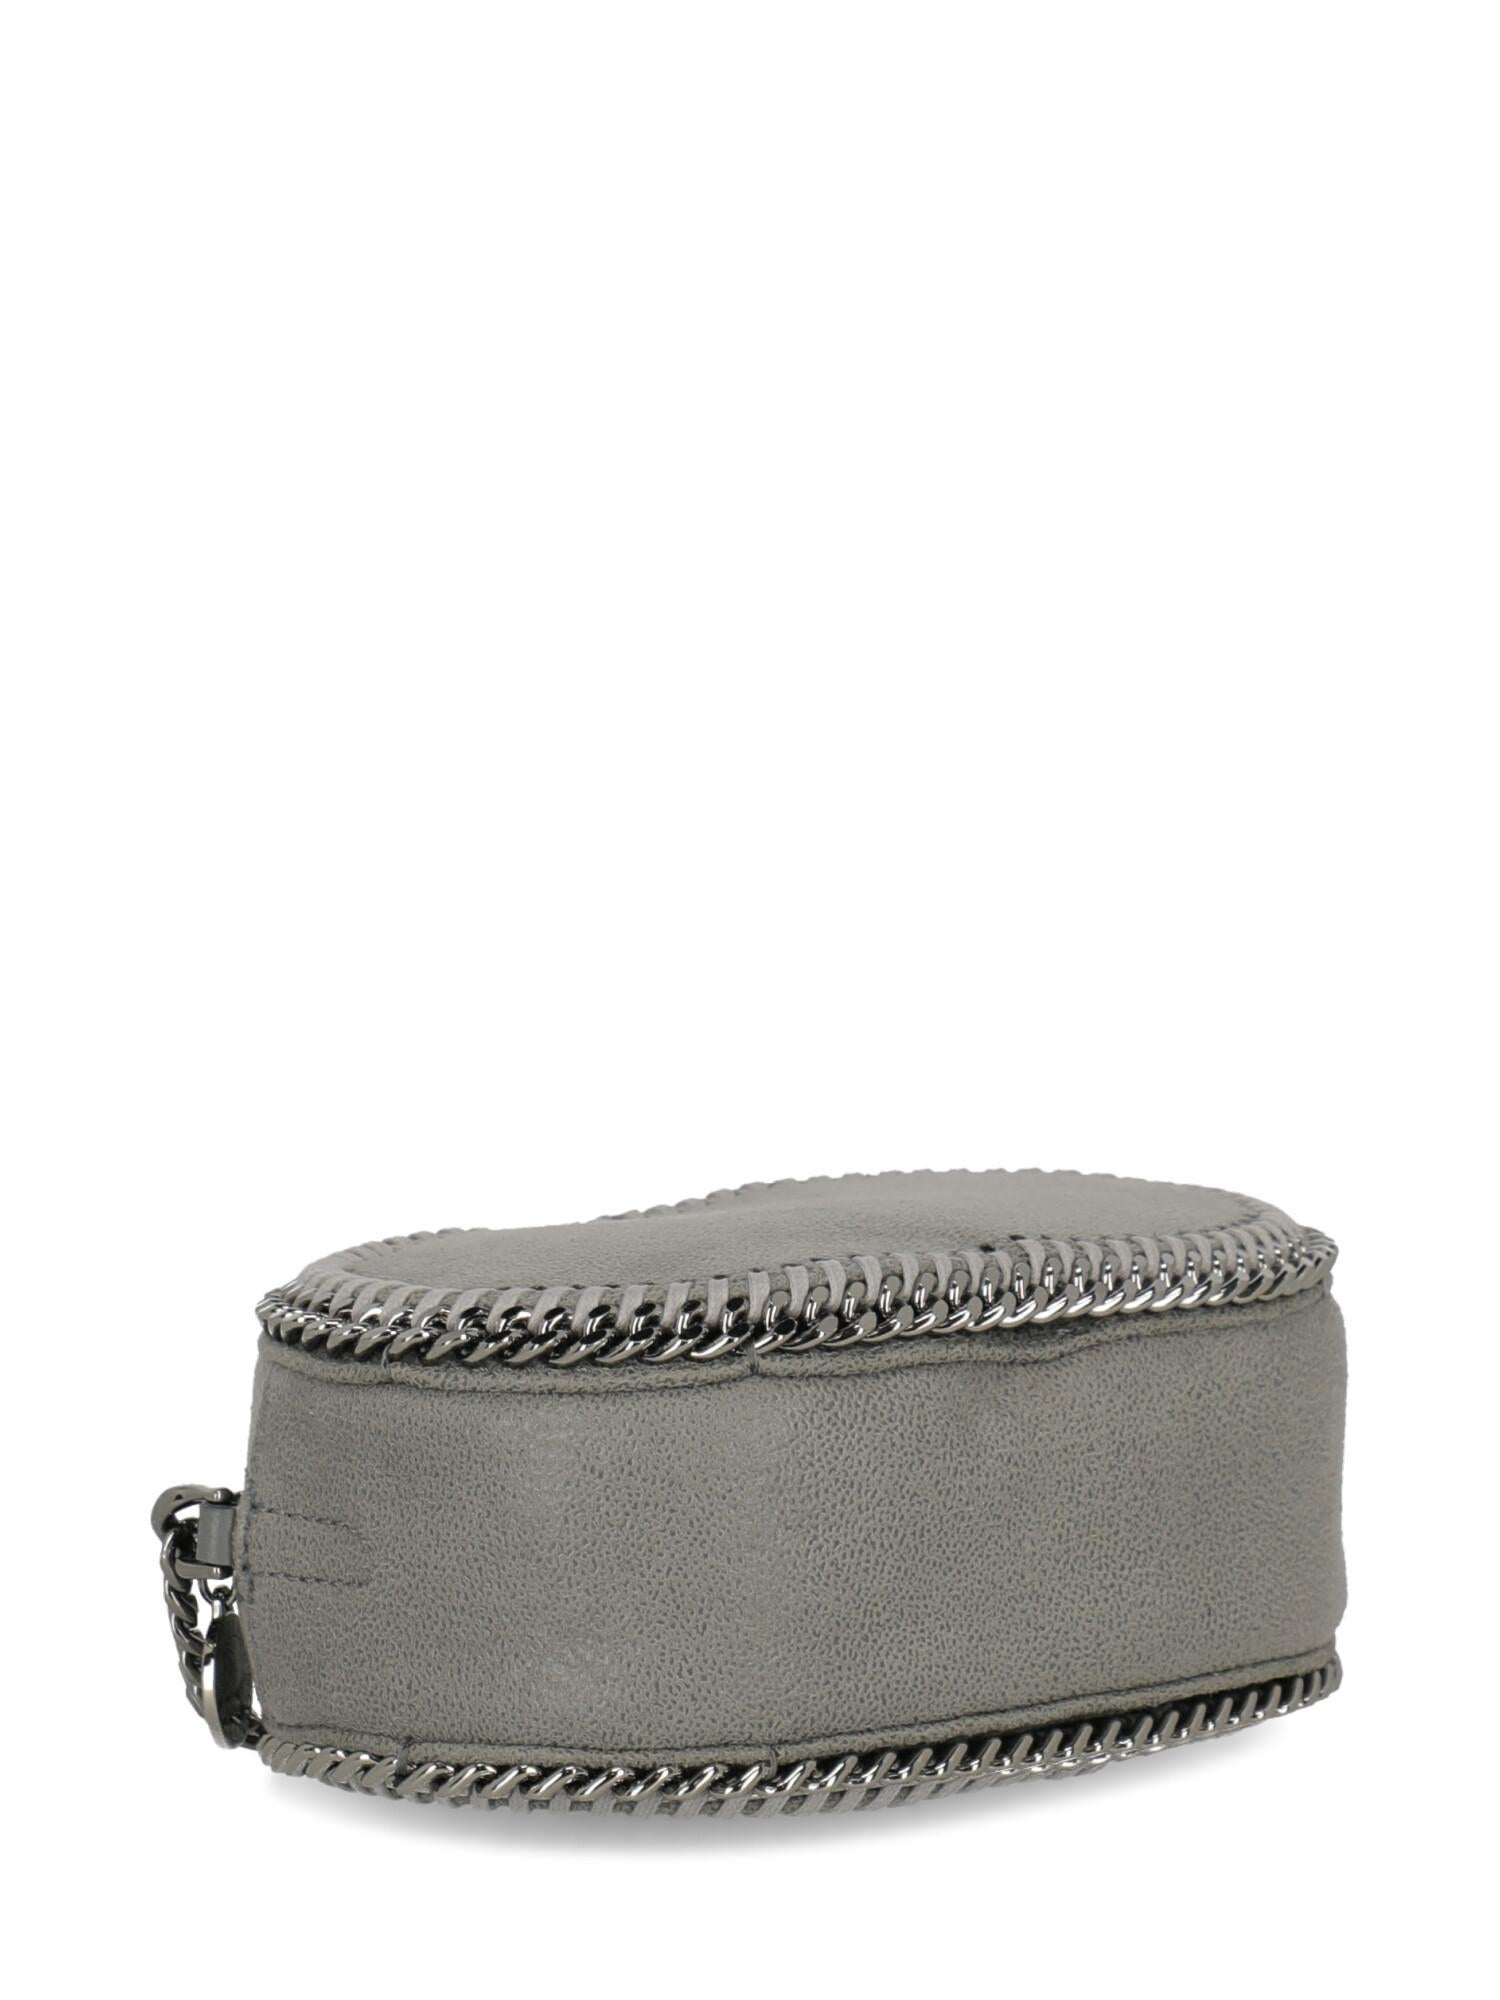 Stella Mccartney Woman Shoulder bag Falabella Grey Faux Leather In Excellent Condition For Sale In Milan, IT